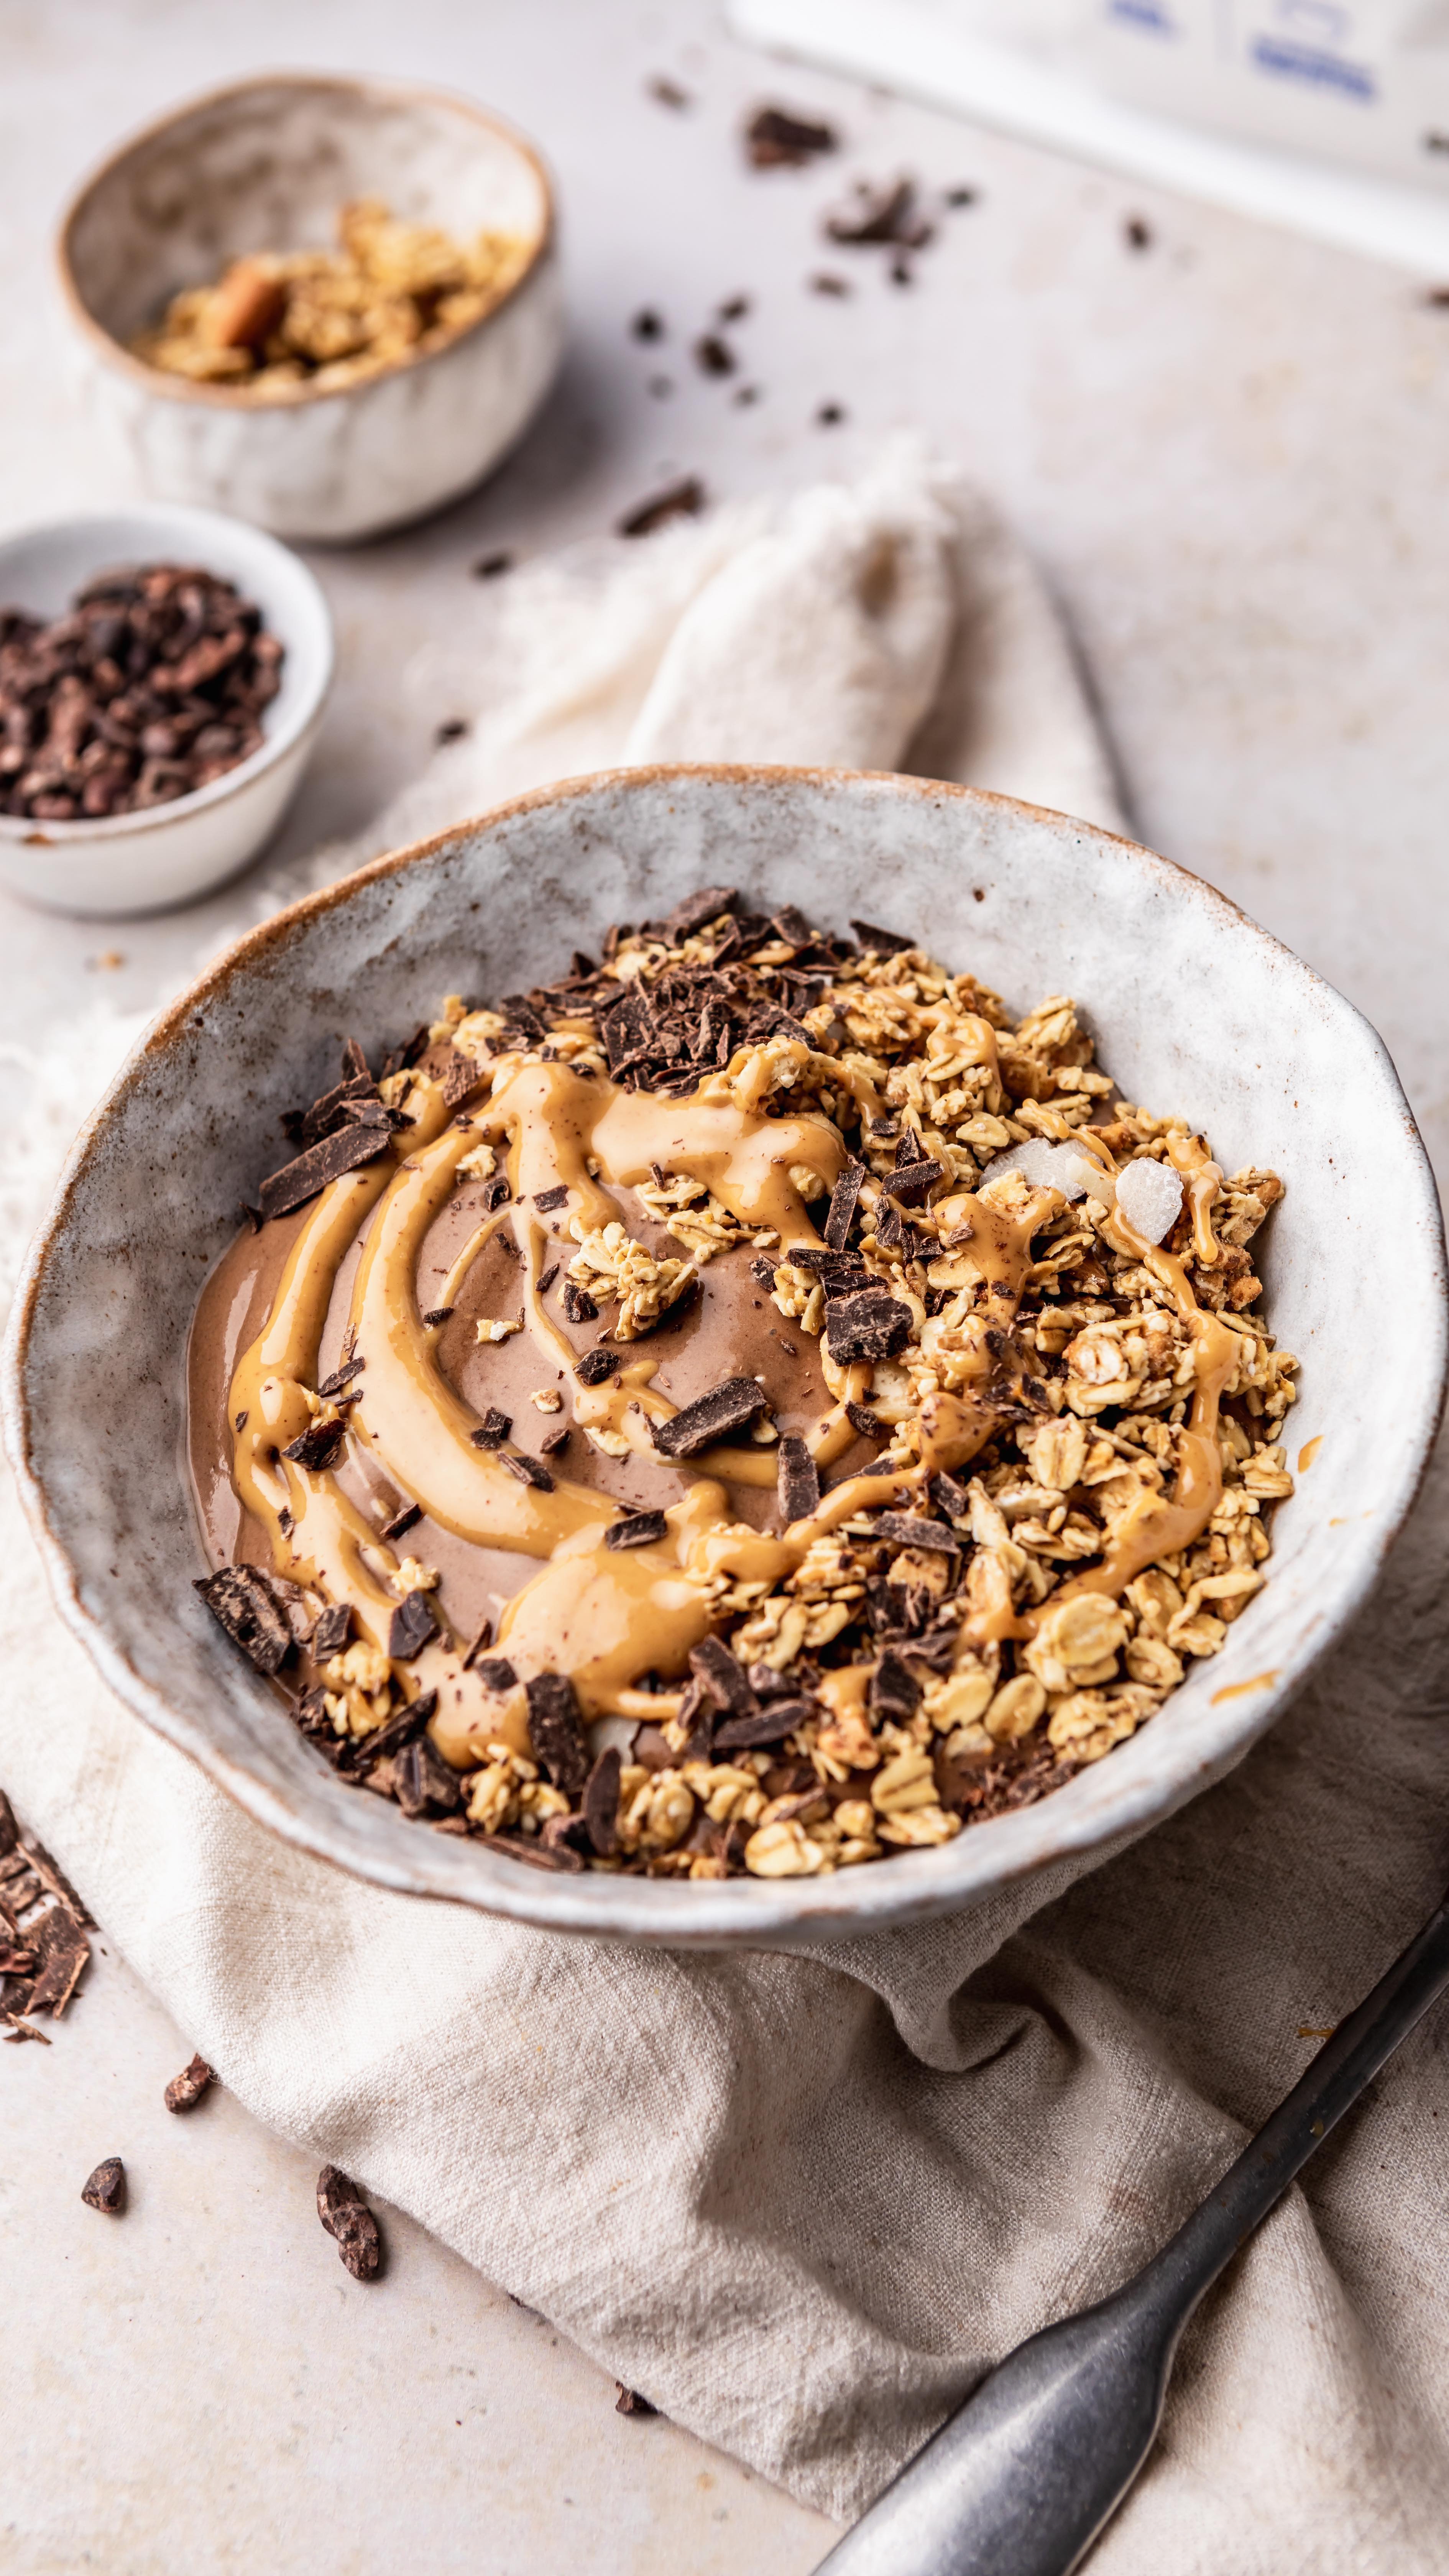 COFFEE CARAMEL SMOOTHIE BOWL

You need to try this THICK, CREAMY smoothie bowl. Texture is 👌🏼 I topped mine with granola, peanut butter and cacao nibs! Hit SAVE to give this a try 😍

SERVES 1
READY IN 10 MINS

INGREDIENTS

1 large banana, sliced and frozen
1 cold espresso
1 tbsp cacao powder
1 scoop Life complete, coffee caramel OR chocolate protein powdwer
2 tbsp almond milk
20g granola
1 tbsp smooth peanut butter
Handful of cacao nibs

METHOD

1. Add the frozen banana, espresso, cacao powder, Life Complete powder (OR protein powder) and almond milk to a high powdered blender. 
2. Blitz until smooth and combined.
3. Spoon into a serving bowl and top with granola, peanut butter and cacao nibs.

AD- Paid to create content for @phdnutrition 

KCAL 494
FAT 17g
CARBS 62g
PROTEIN 27g